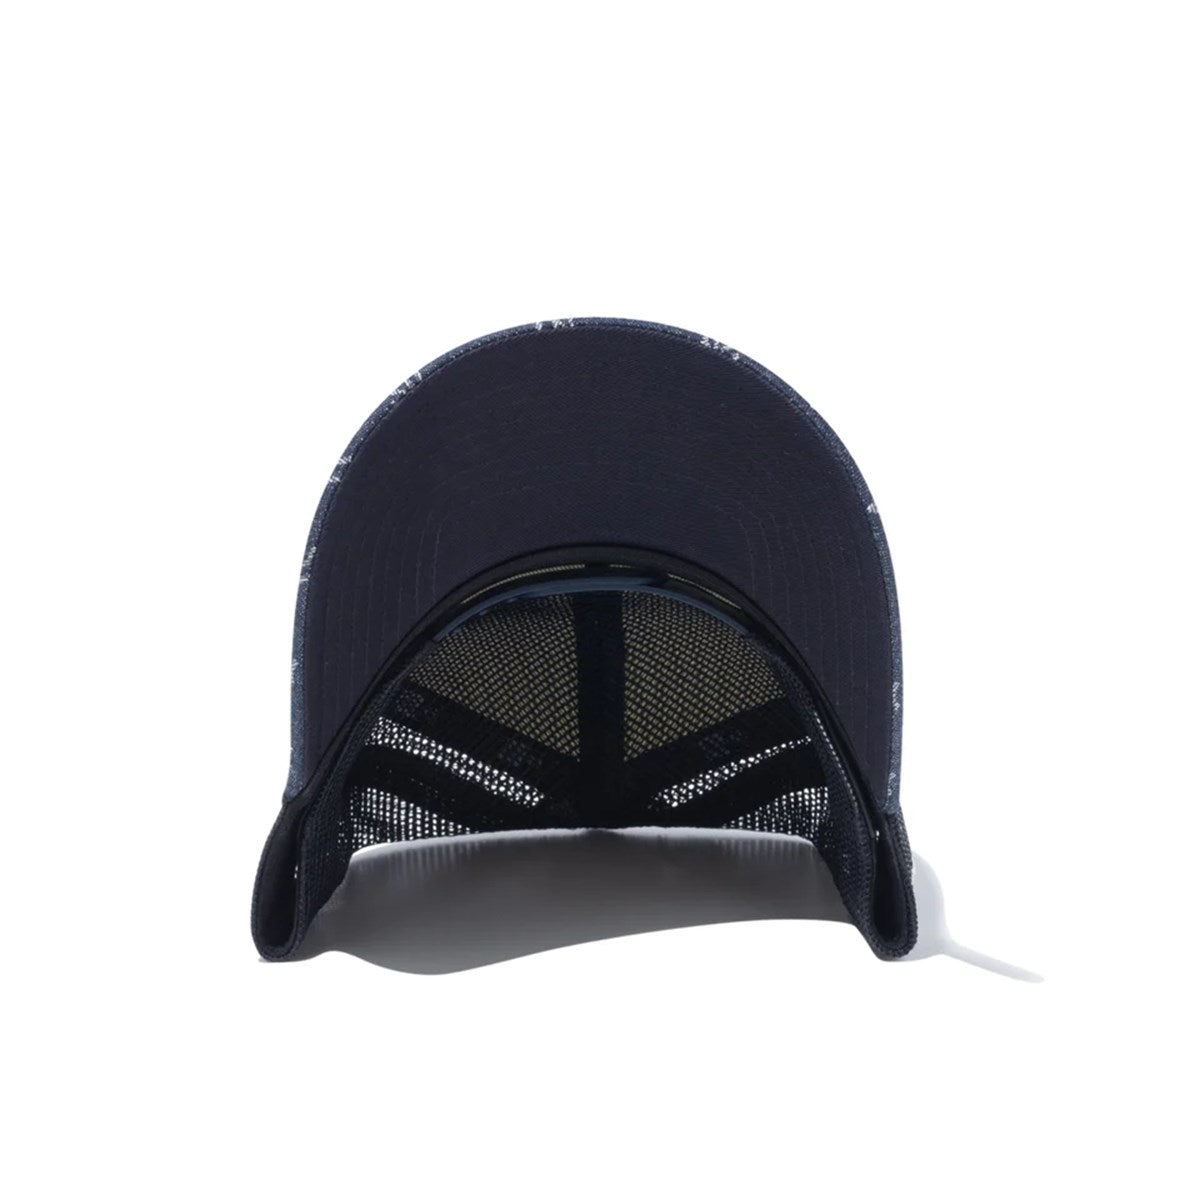 NEW ERA New York Yankees - 9FORTY A-FRAME TRACKER JACQUARD NVY CRM【14109686】